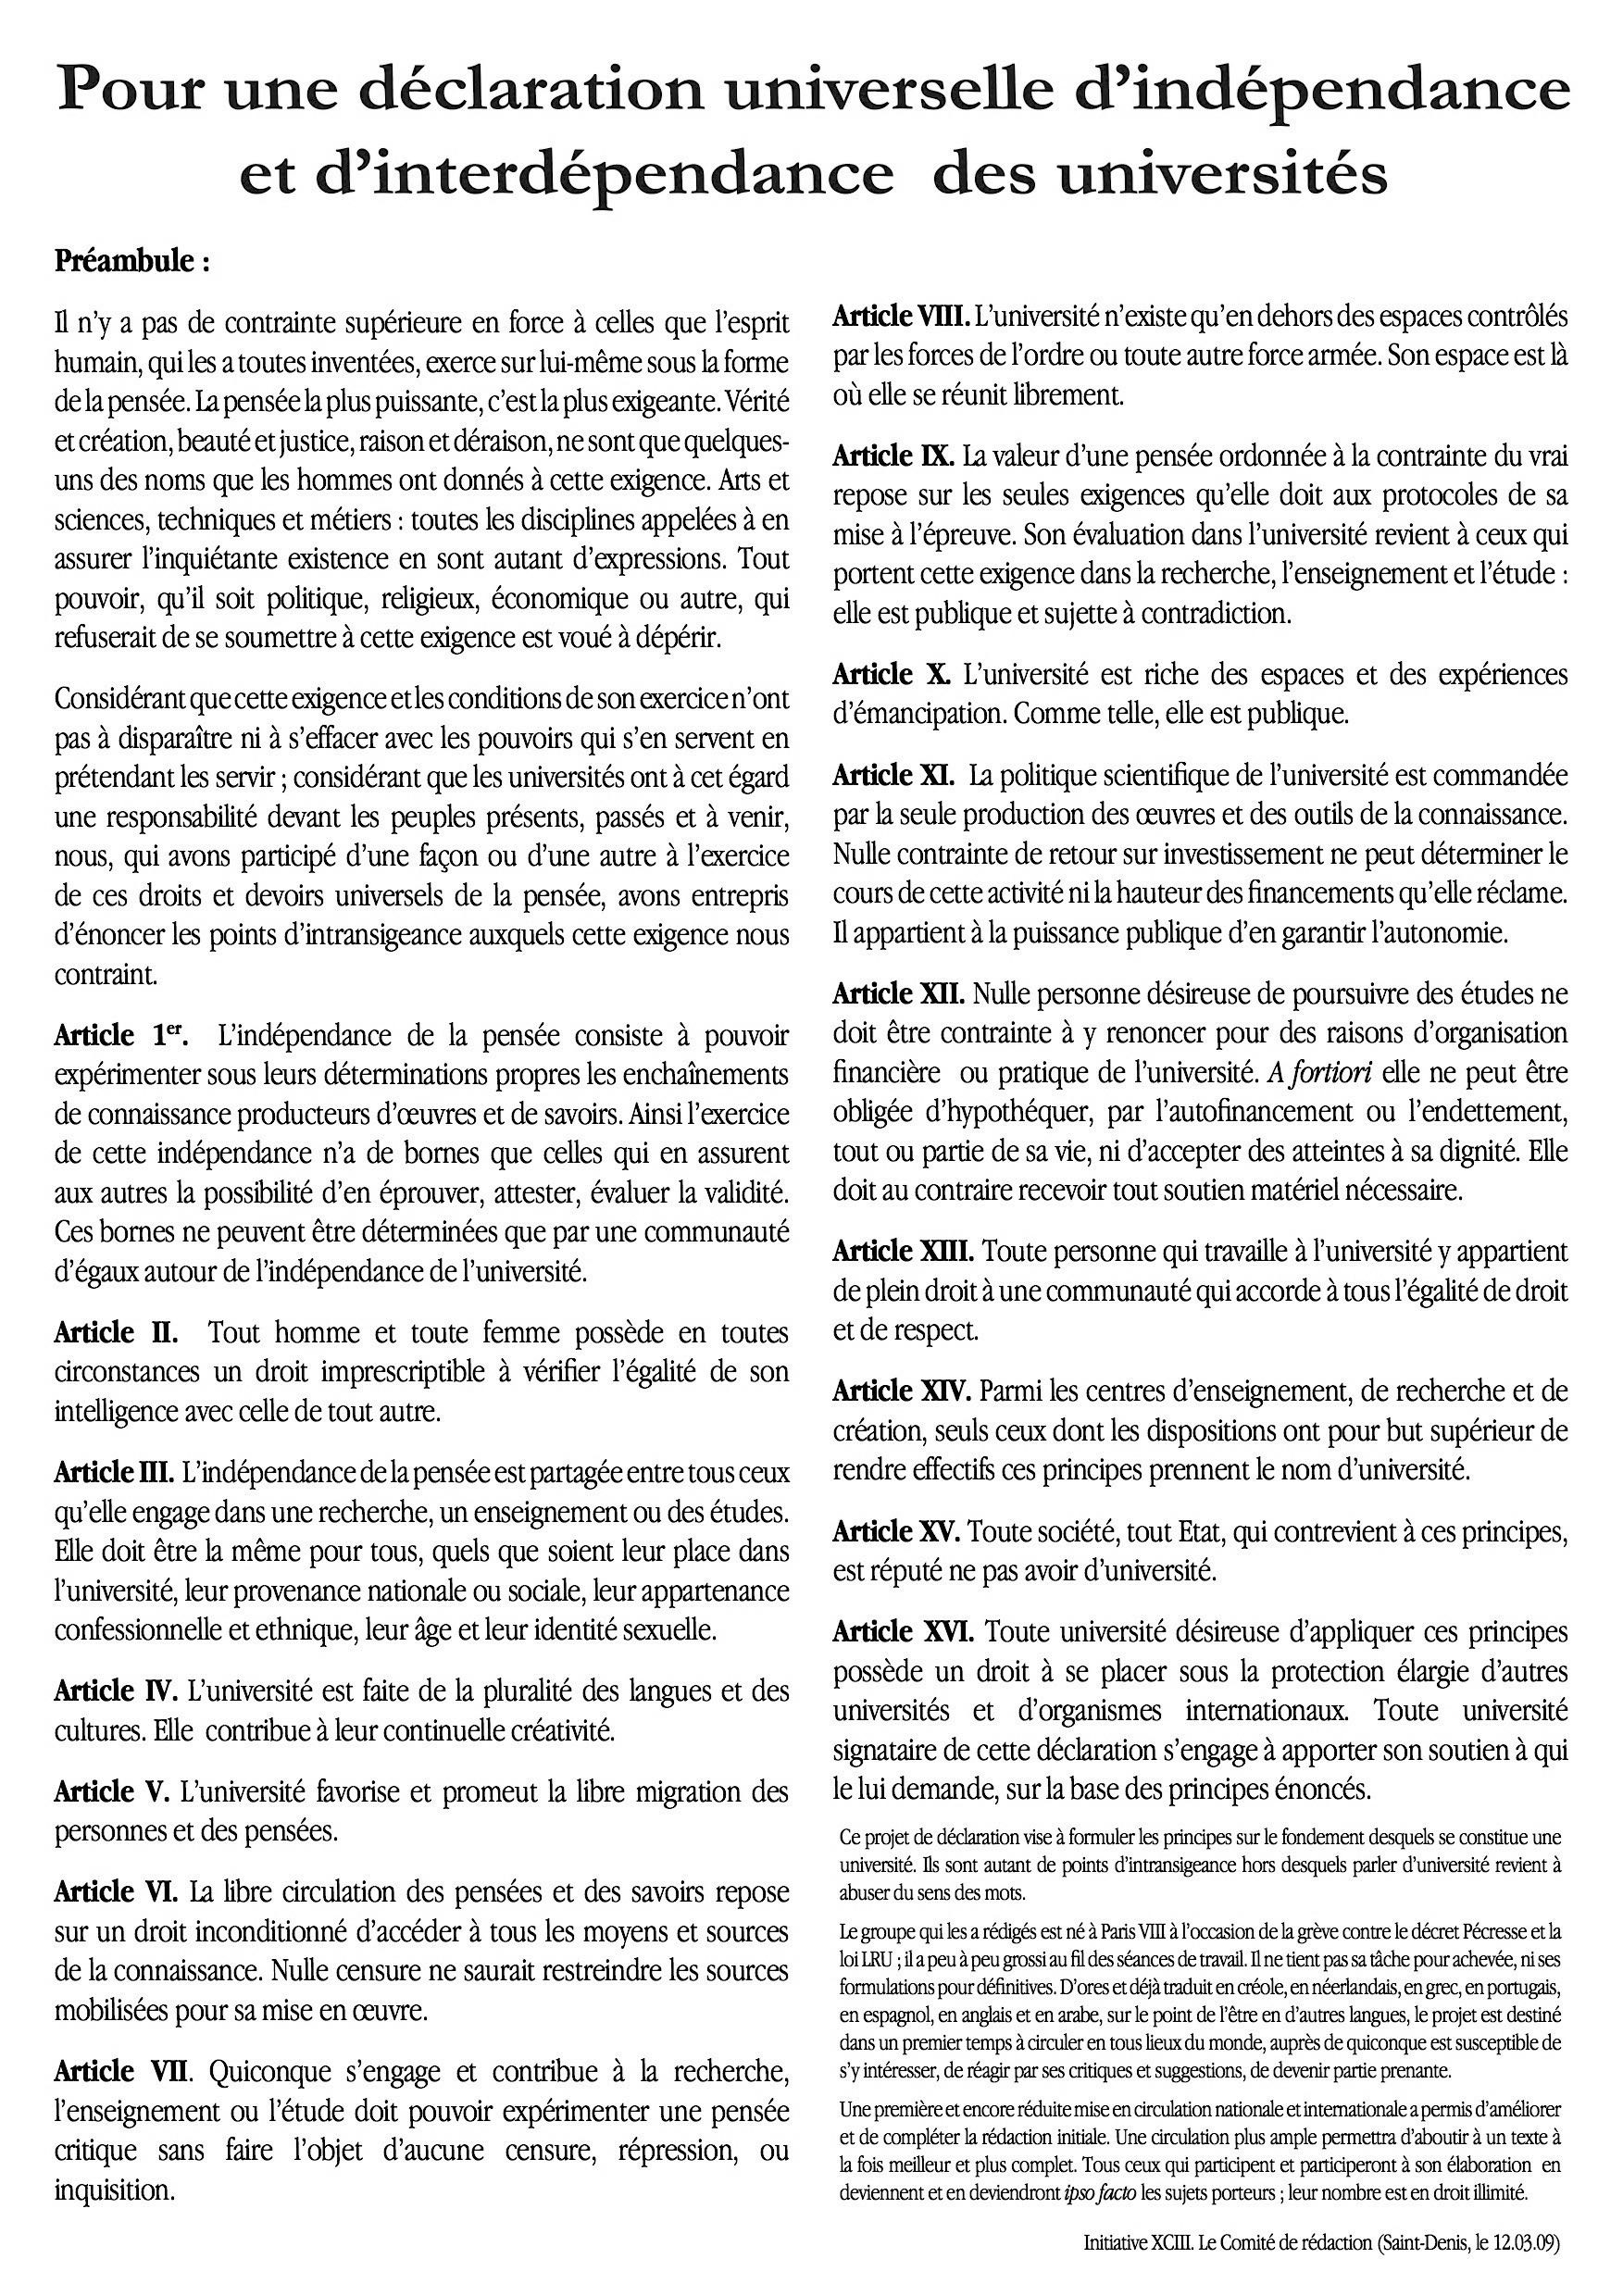 Figure 52:  Printed version of the Universal Declaration of Independence and Interdependence of the Universities.